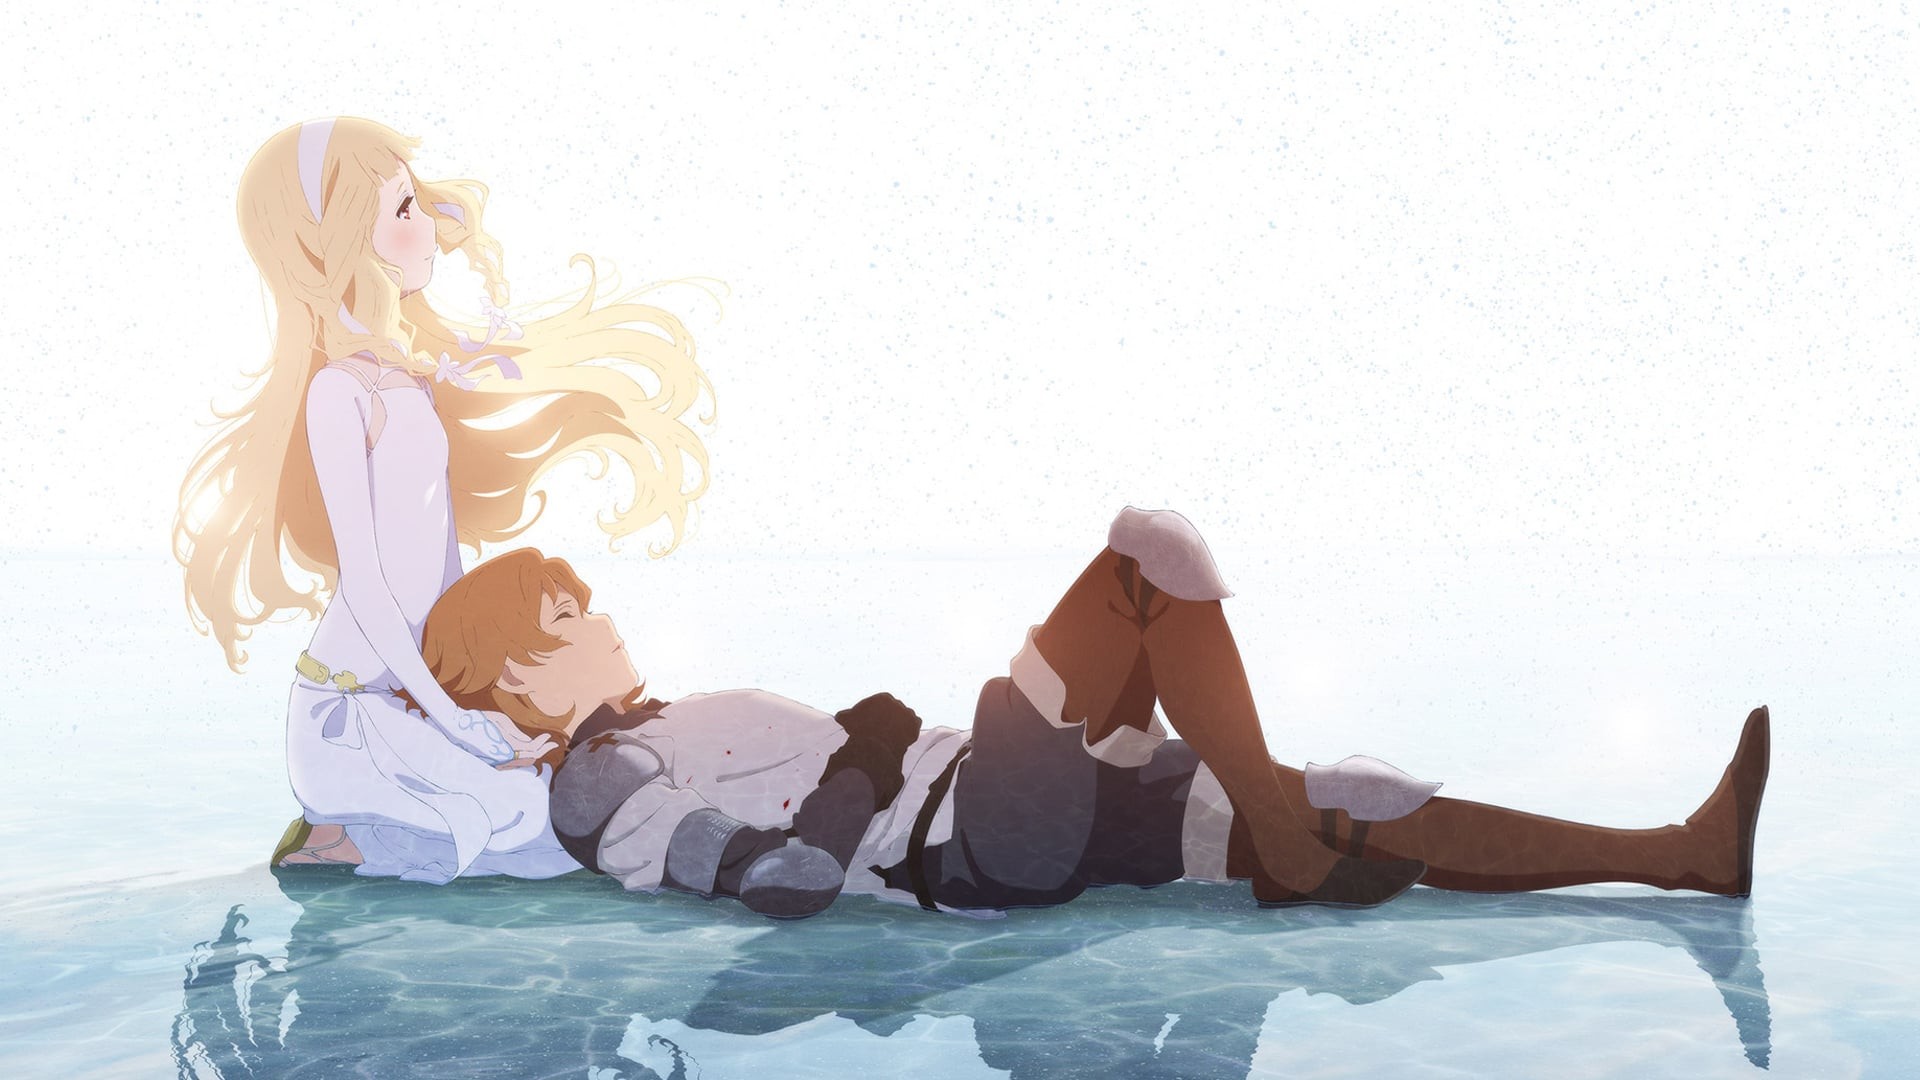 Maquia: When the Promised Flower Blooms background